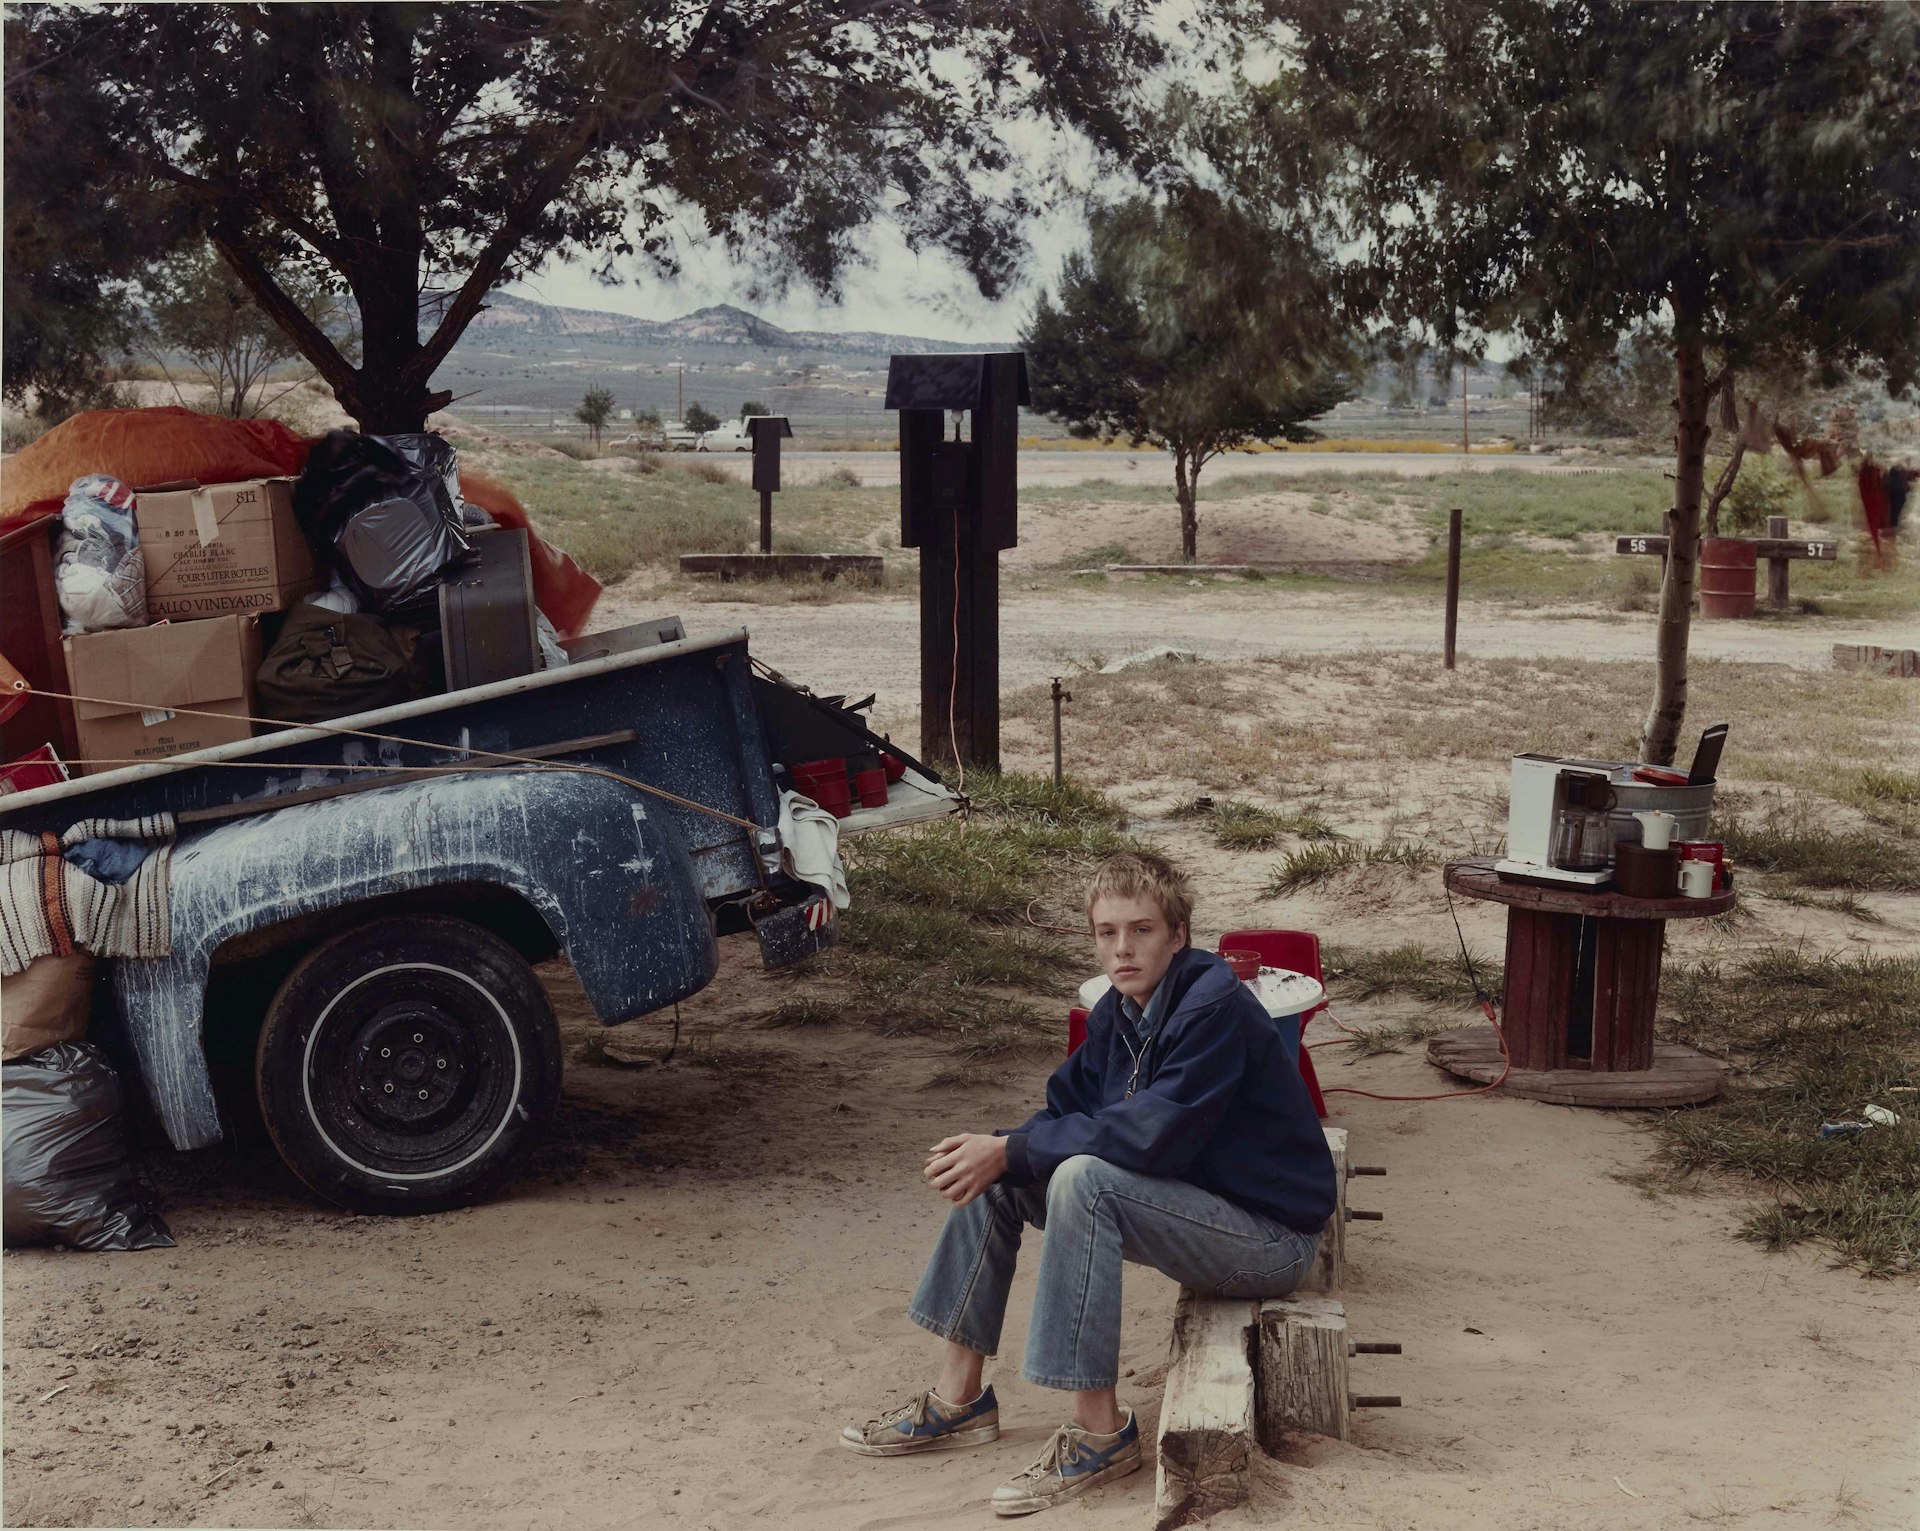 Red Rock State Campground (Boy), Gallup, New Mexico, September 1982 © Joel Sternfeld courtesy Luhring Augustine Gallery and Beetles + Huxley Gallery